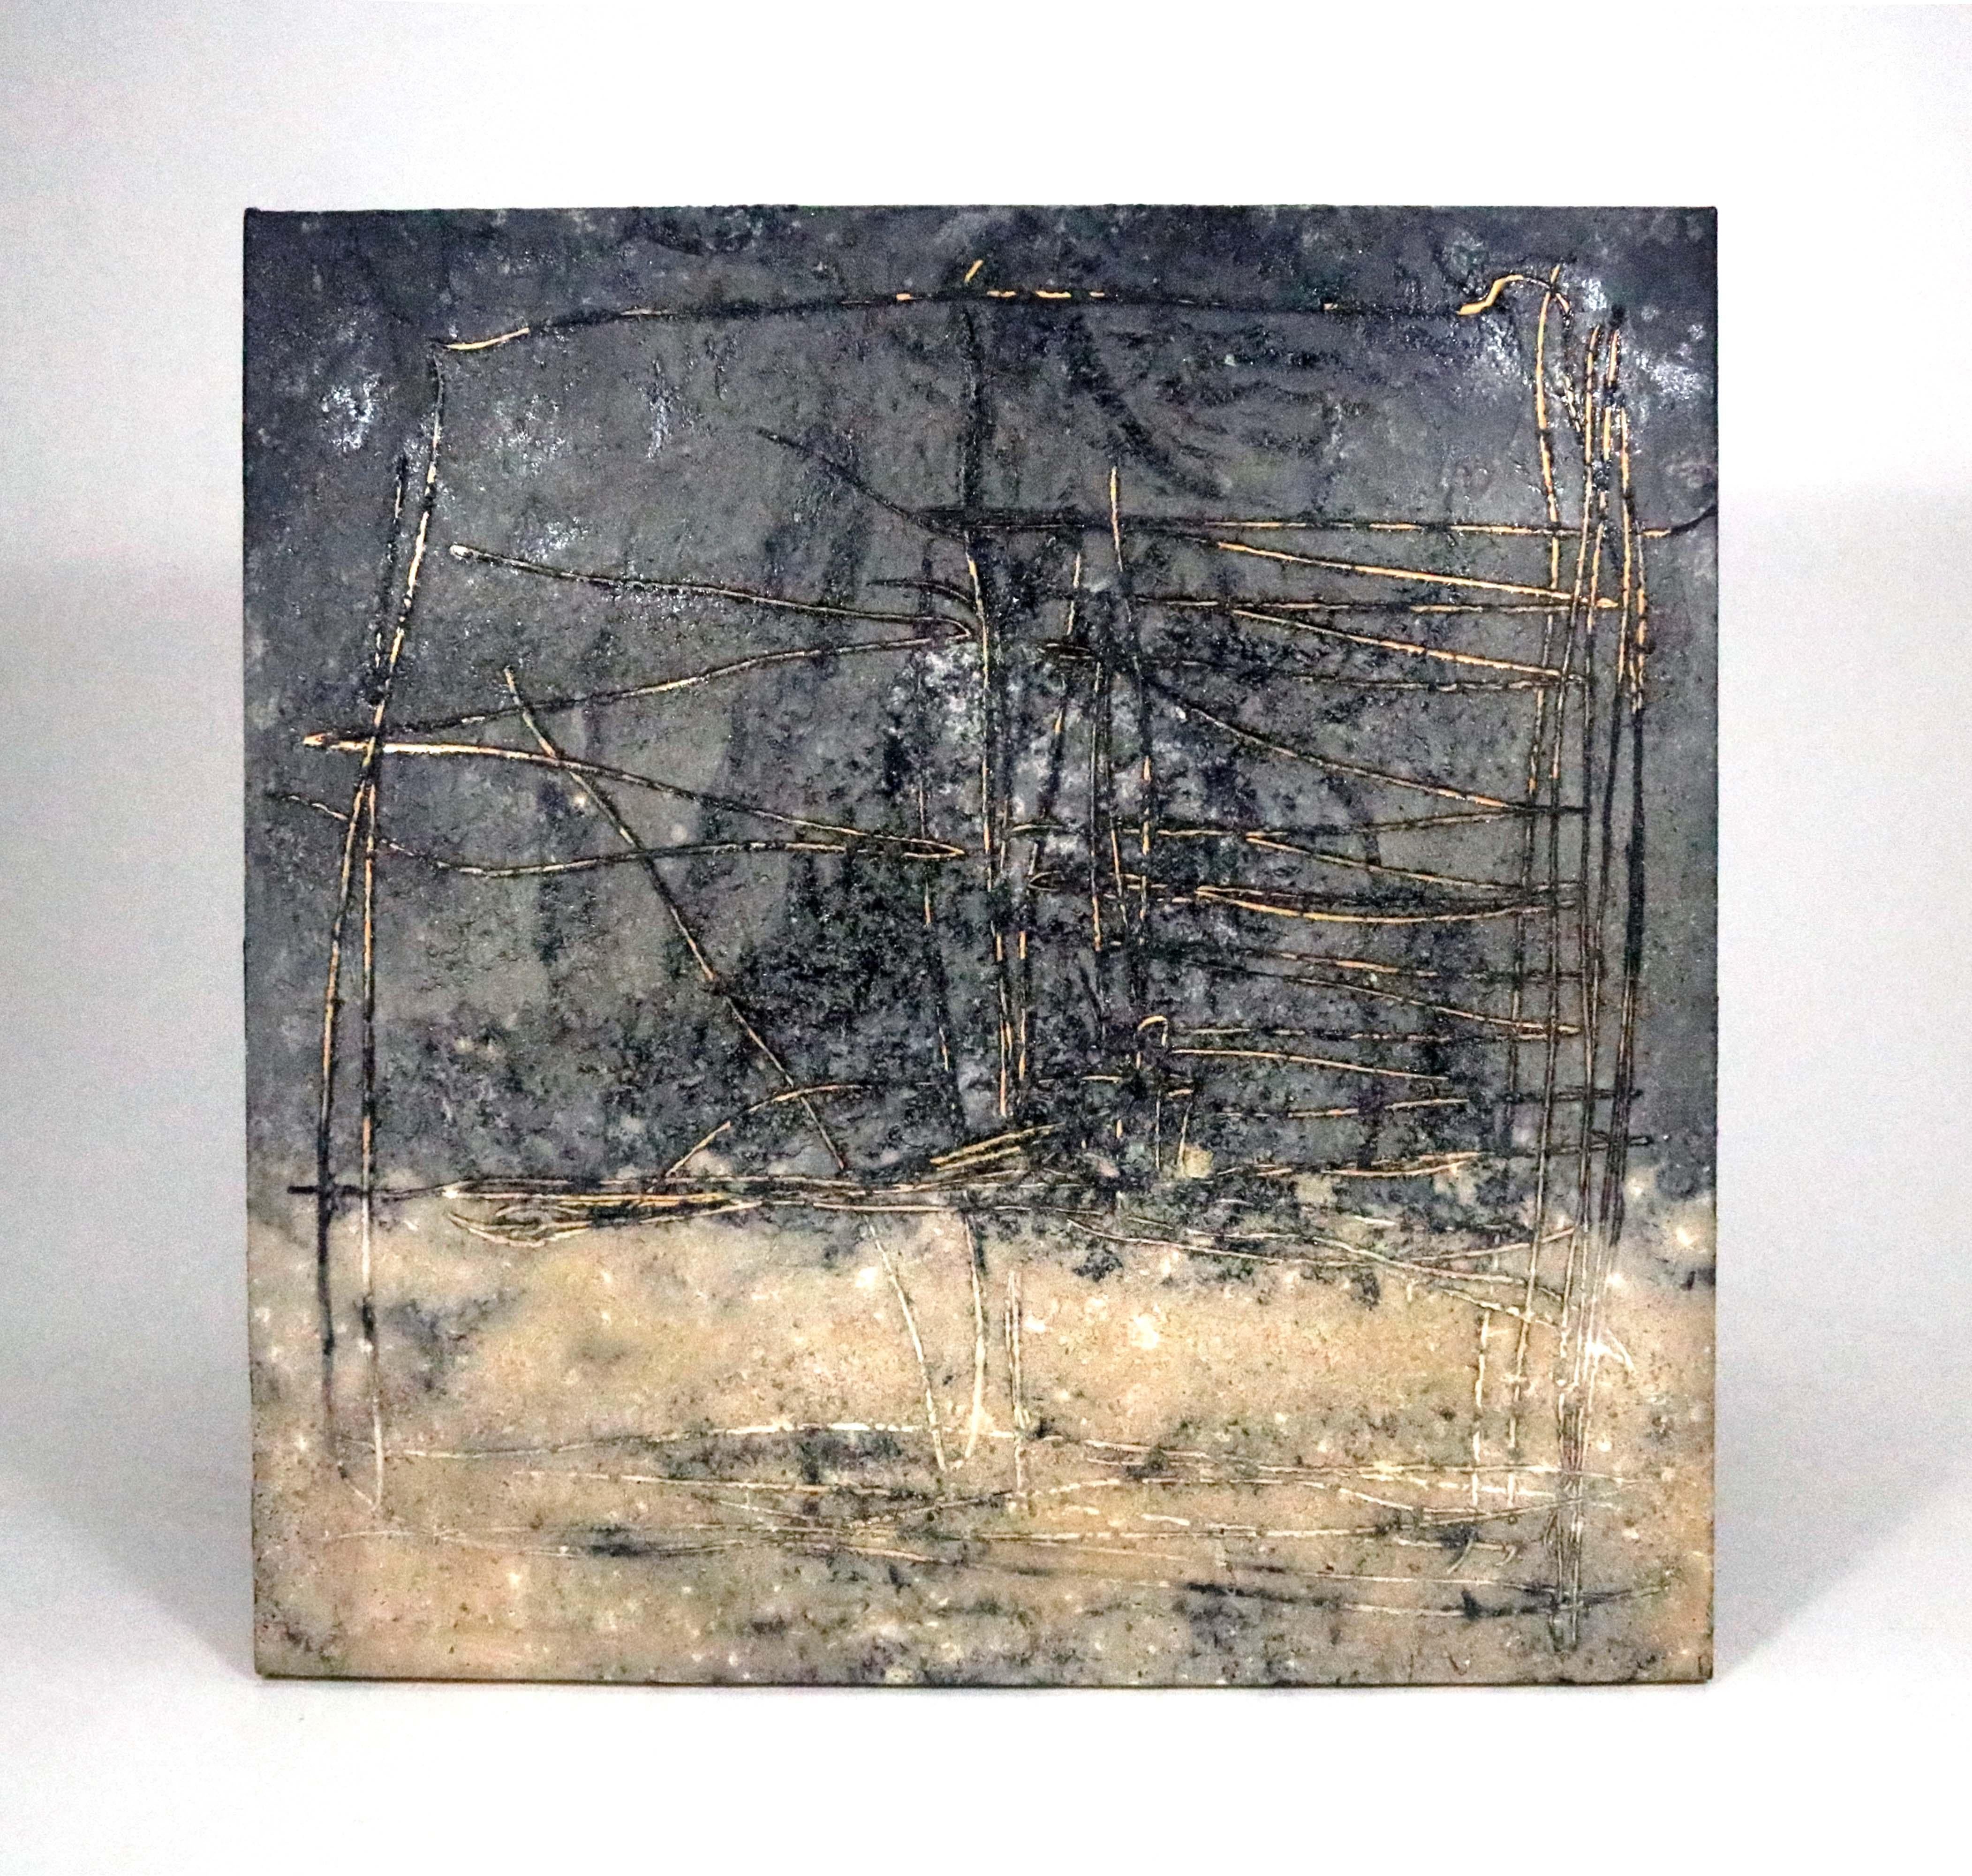 A striking and engaging oil and ground granite on canvas work by Edward Lentsch, 2015.

Previously included in the 